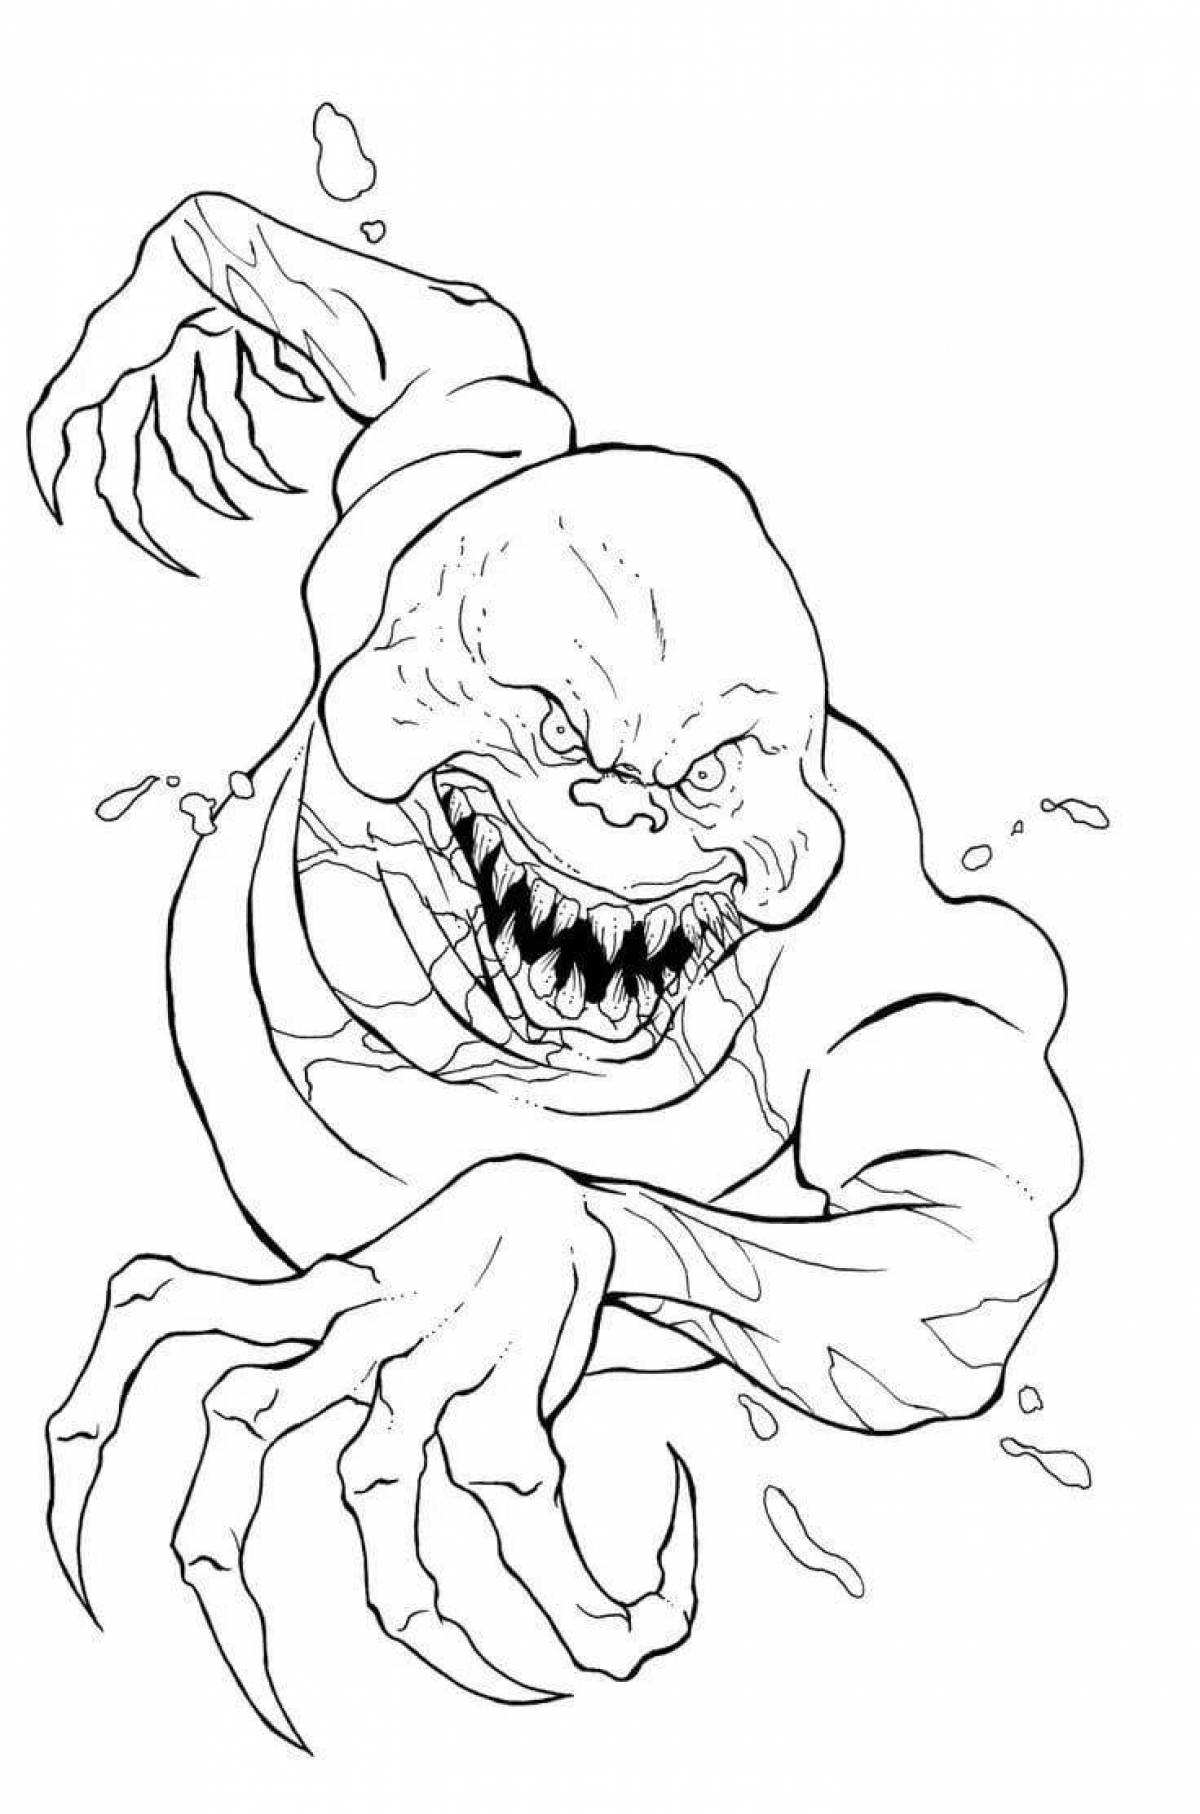 Coloring page of the outgoing blue monster